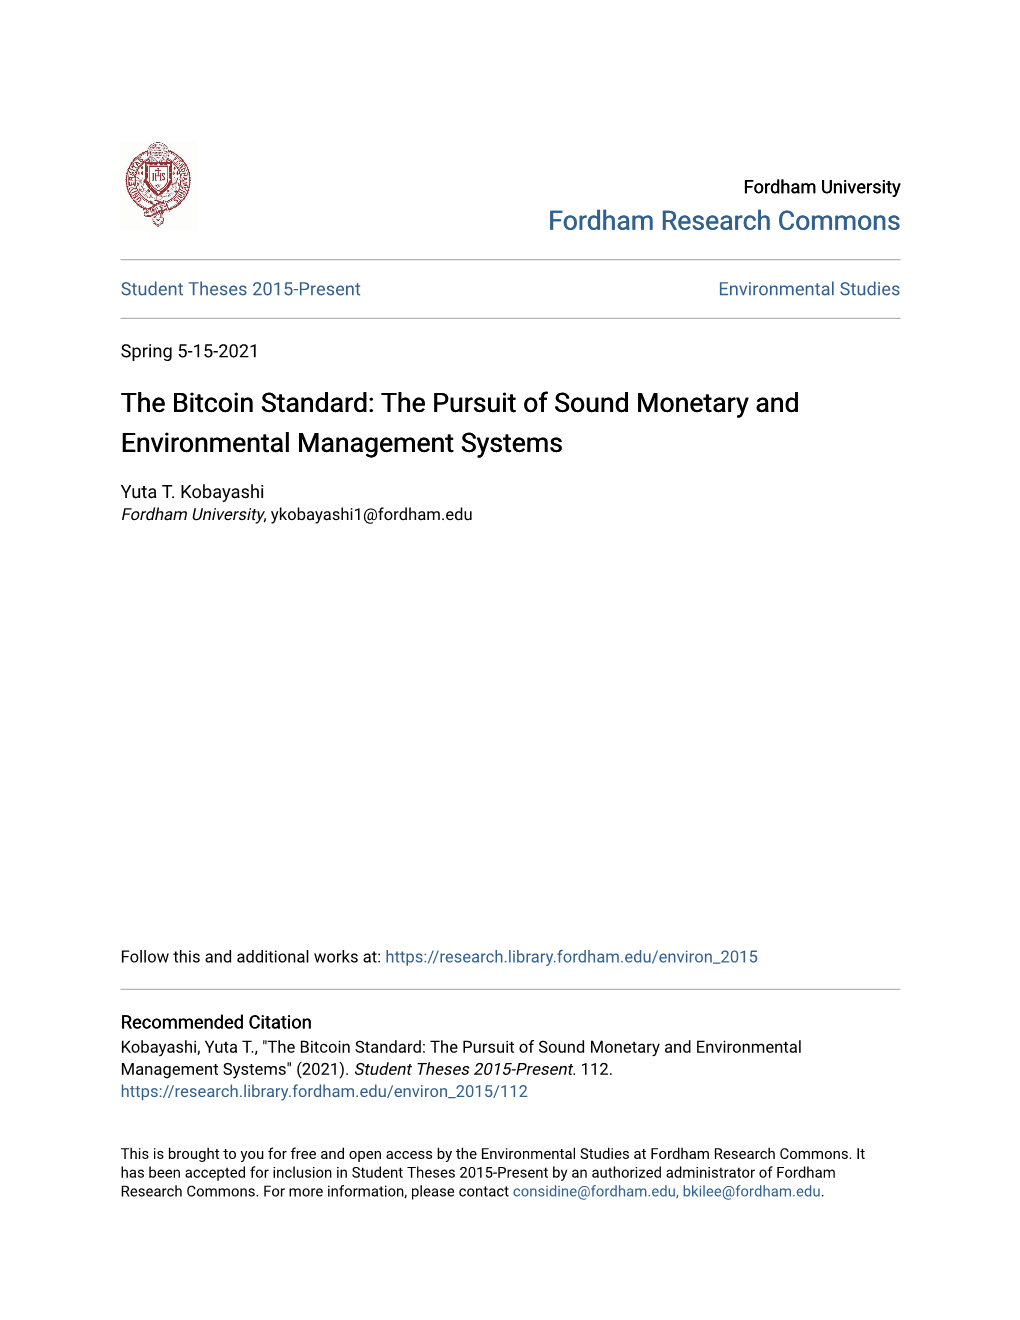 The Bitcoin Standard: the Pursuit of Sound Monetary and Environmental Management Systems